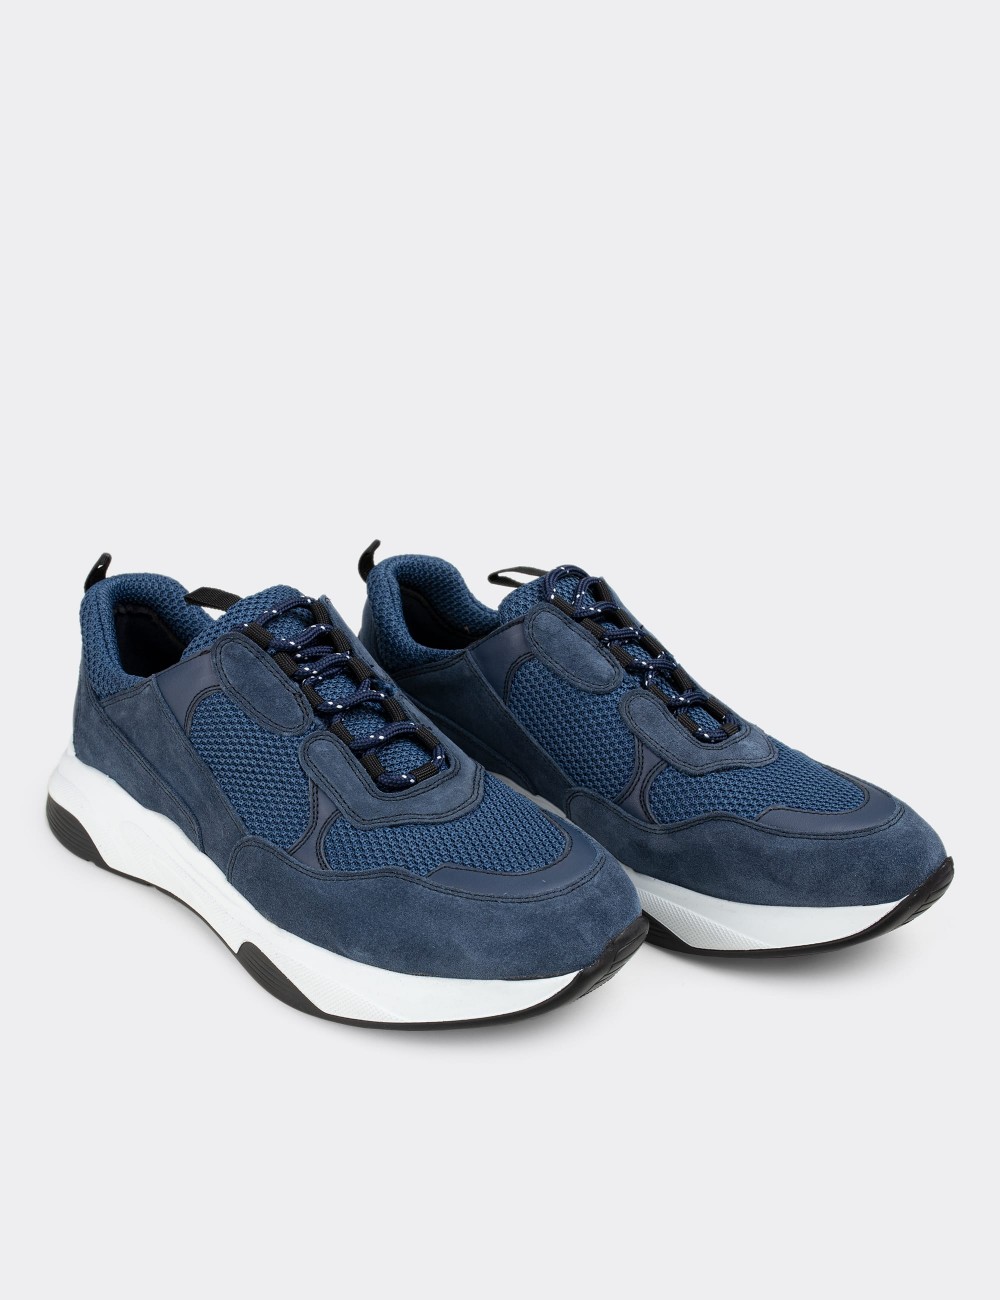 Blue Suede Leather Sneakers - 01724MMVIE01